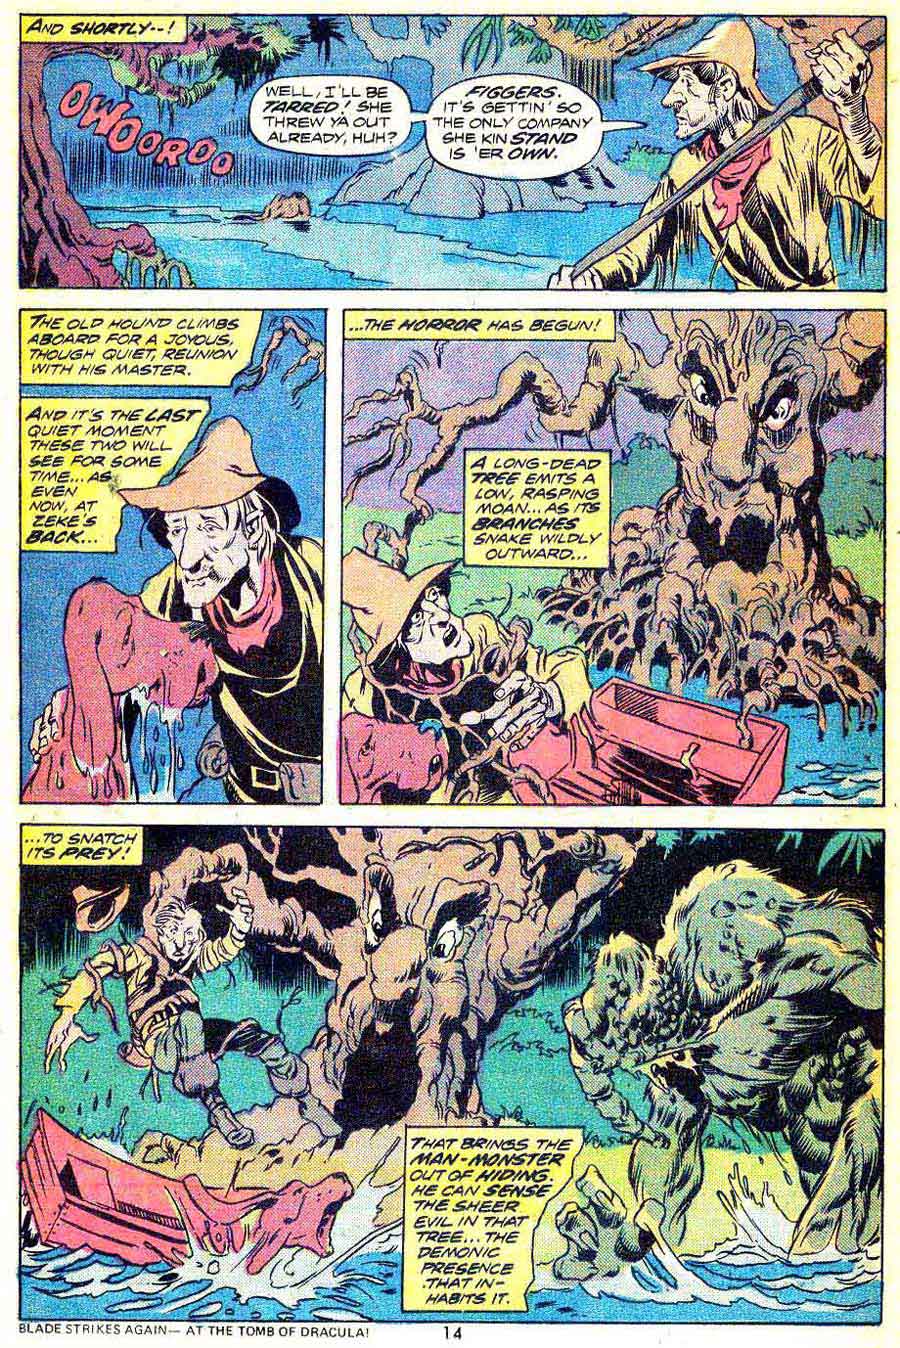 Man-Thing v1 #9 marvel comic 1970s bronze age comic page art by Mike Ploog